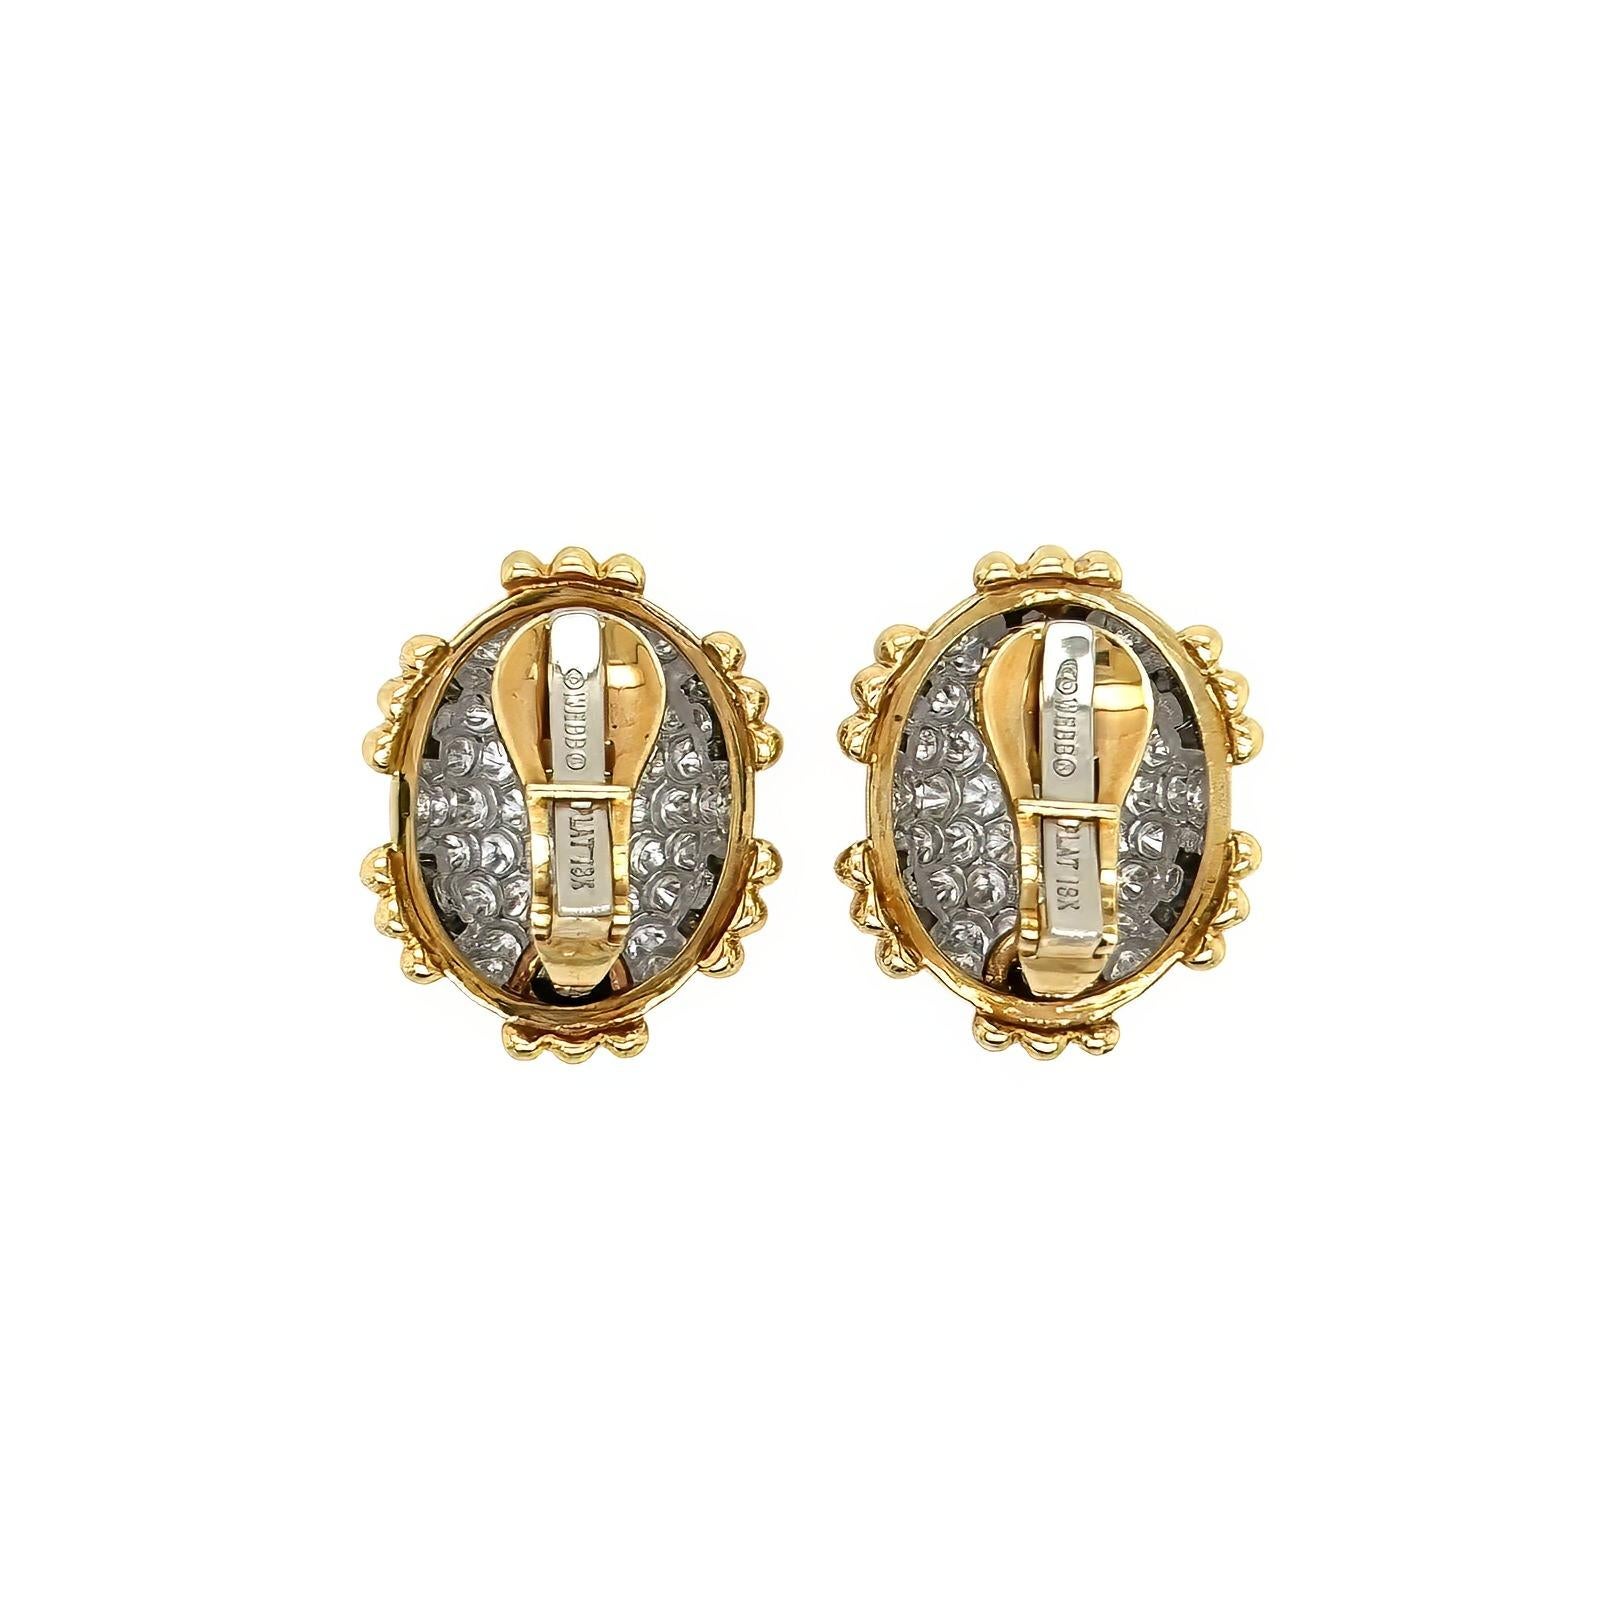 A pair of 18 karat yellow gold, platinum and diamond earclips, David Webb.  Each earclip designed as a platinum bombe oval pave set with approximately forty three (43) round brilliant cut diamonds within six (6) fluted gold brackets.  Total diamond